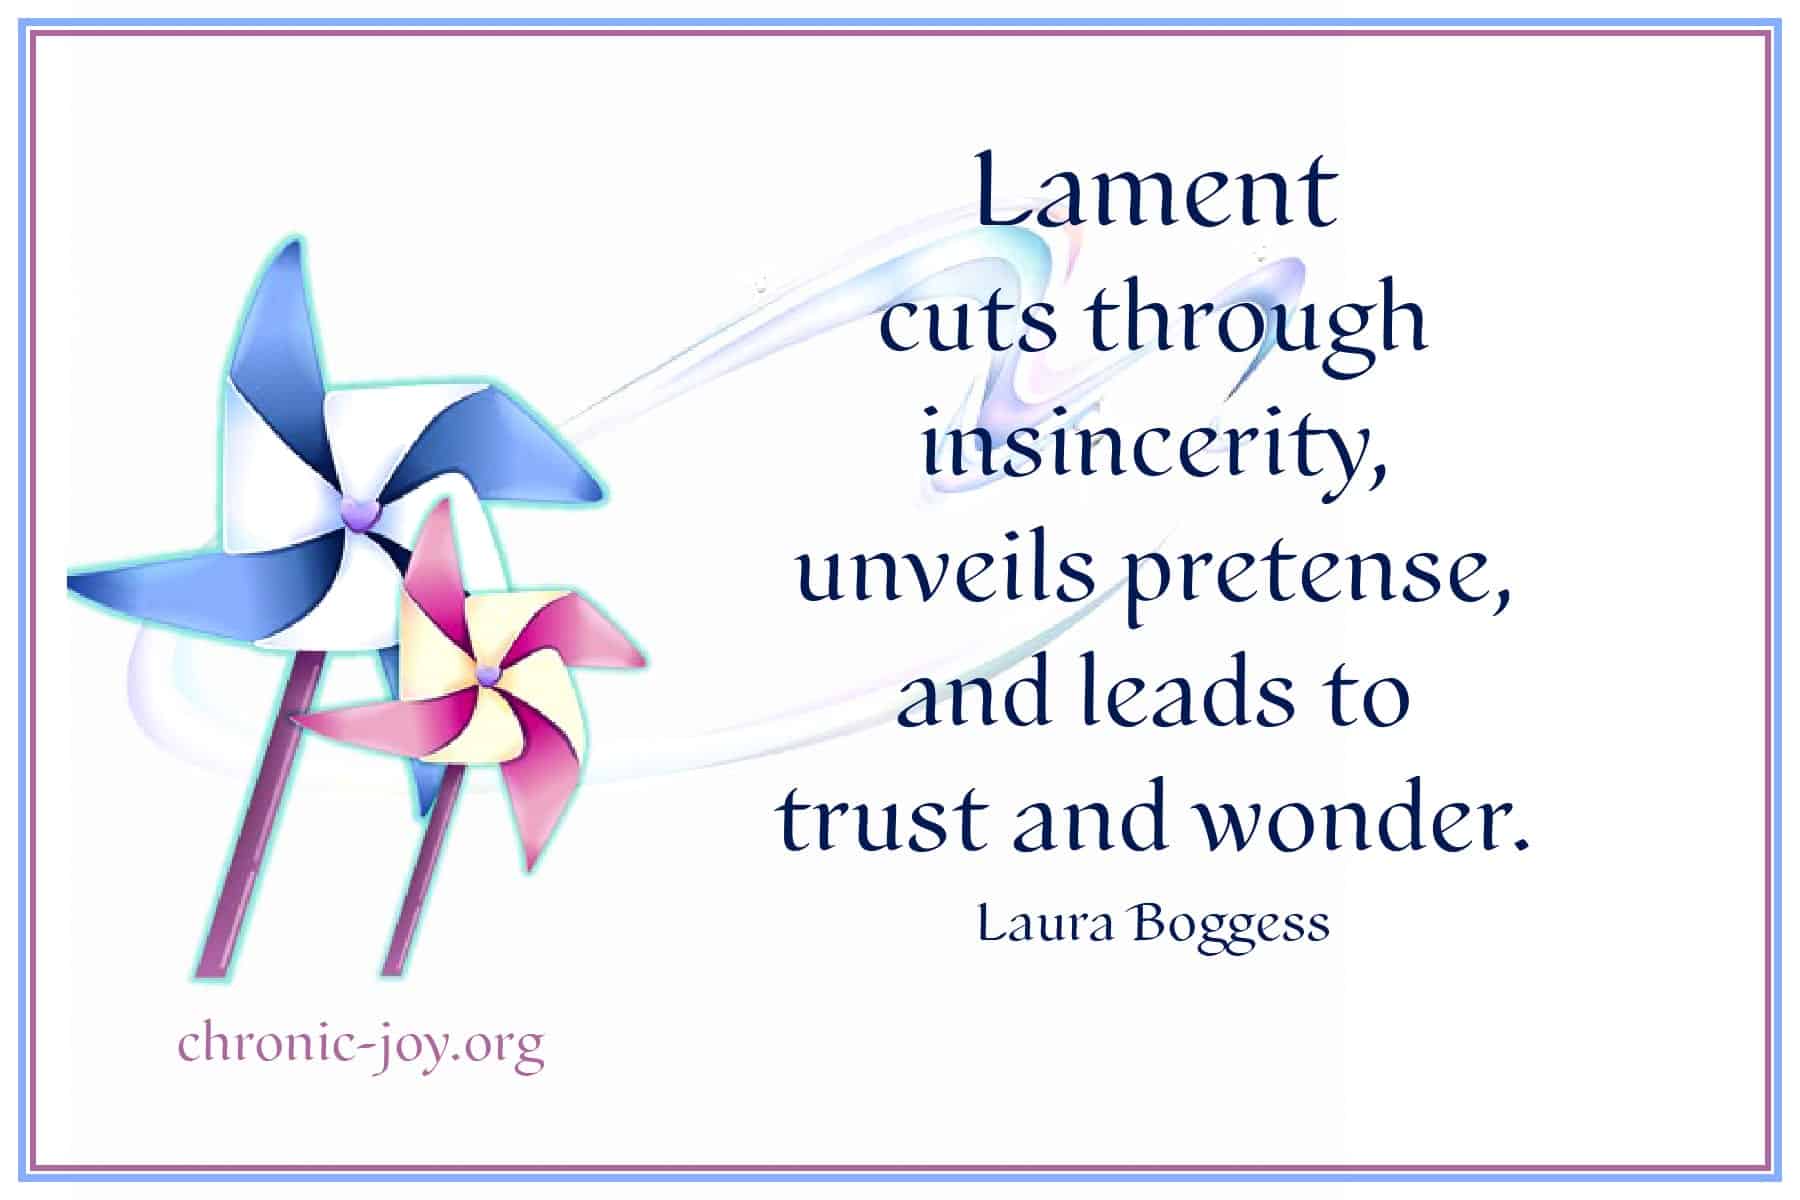 Lament leads to trust and wonder.